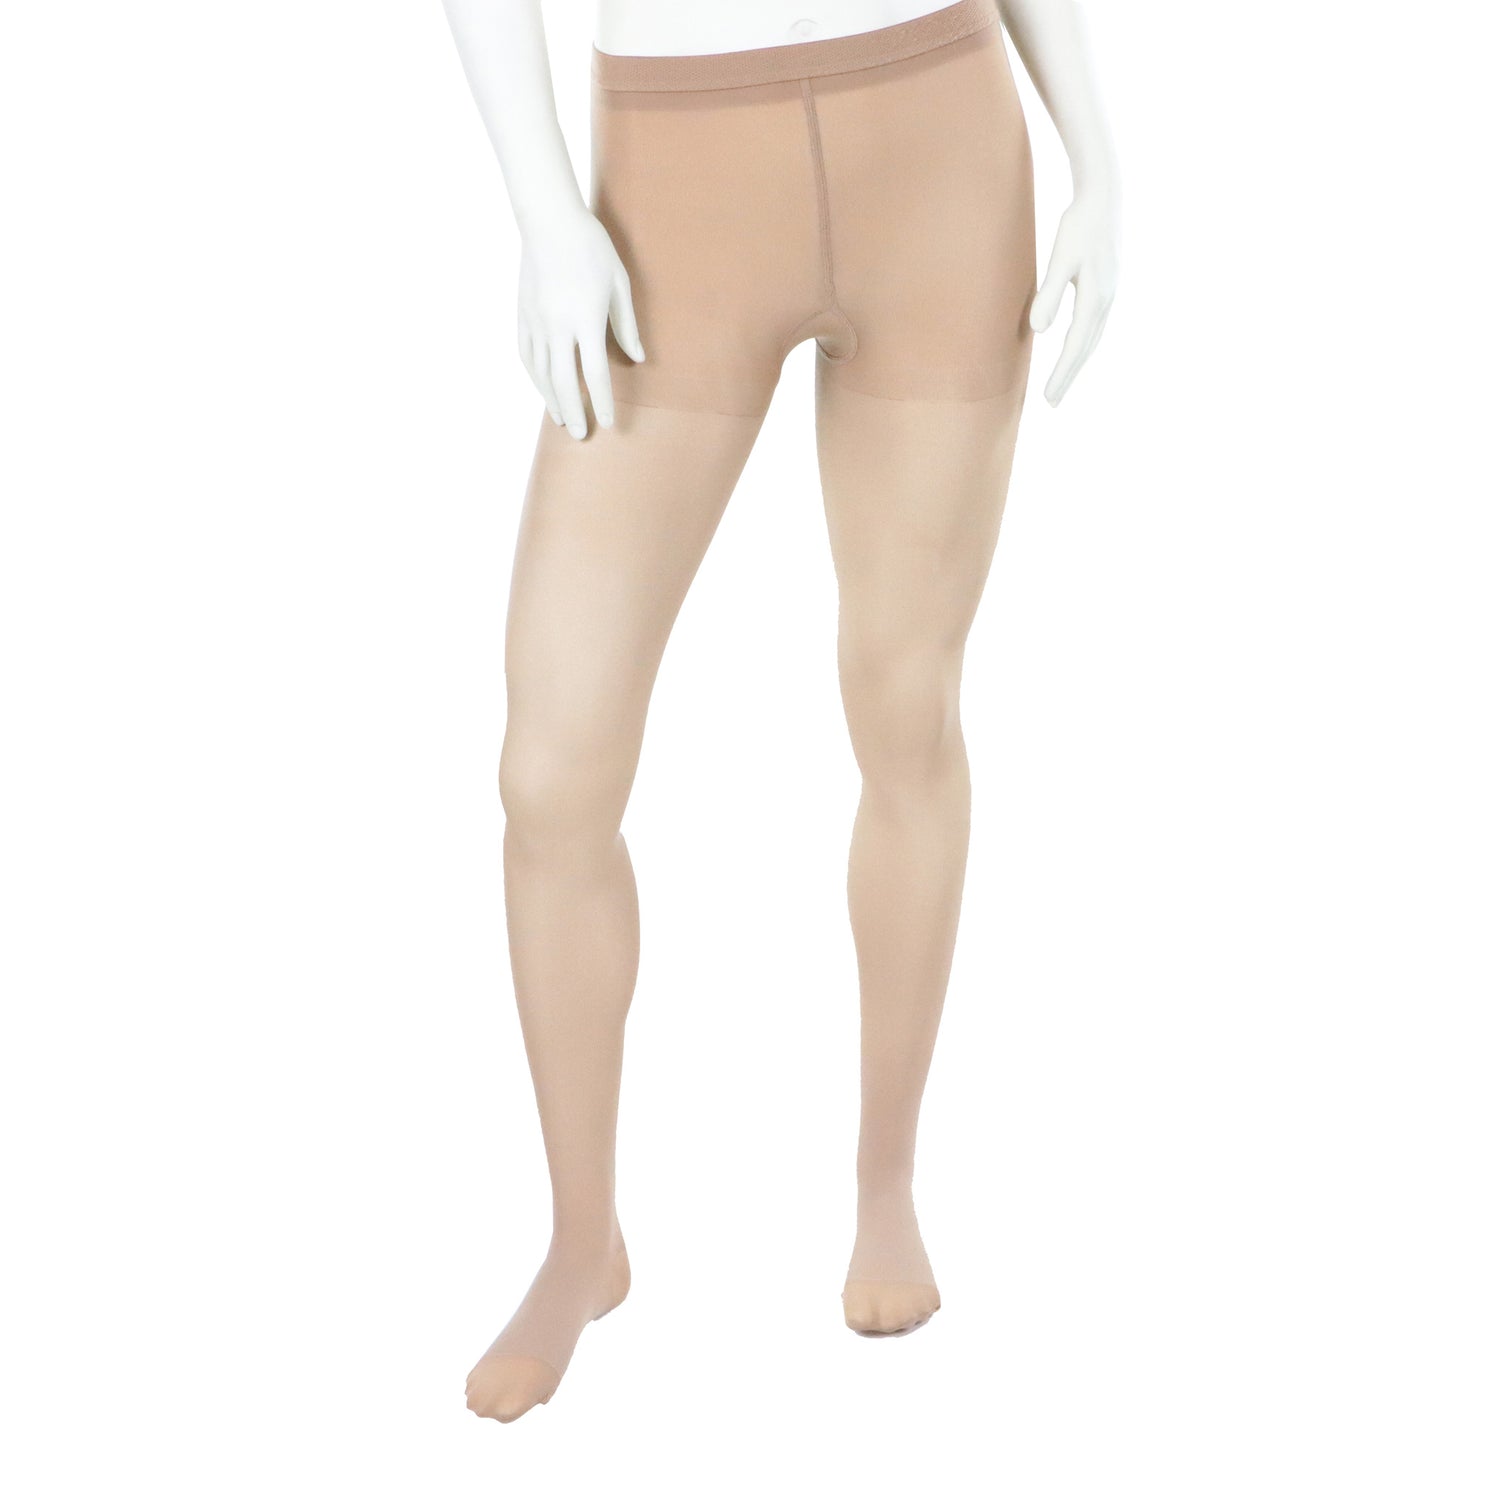 Compression tights for women in 20-30 mmHg beige color closed toe Doctor Brace zoomed leg